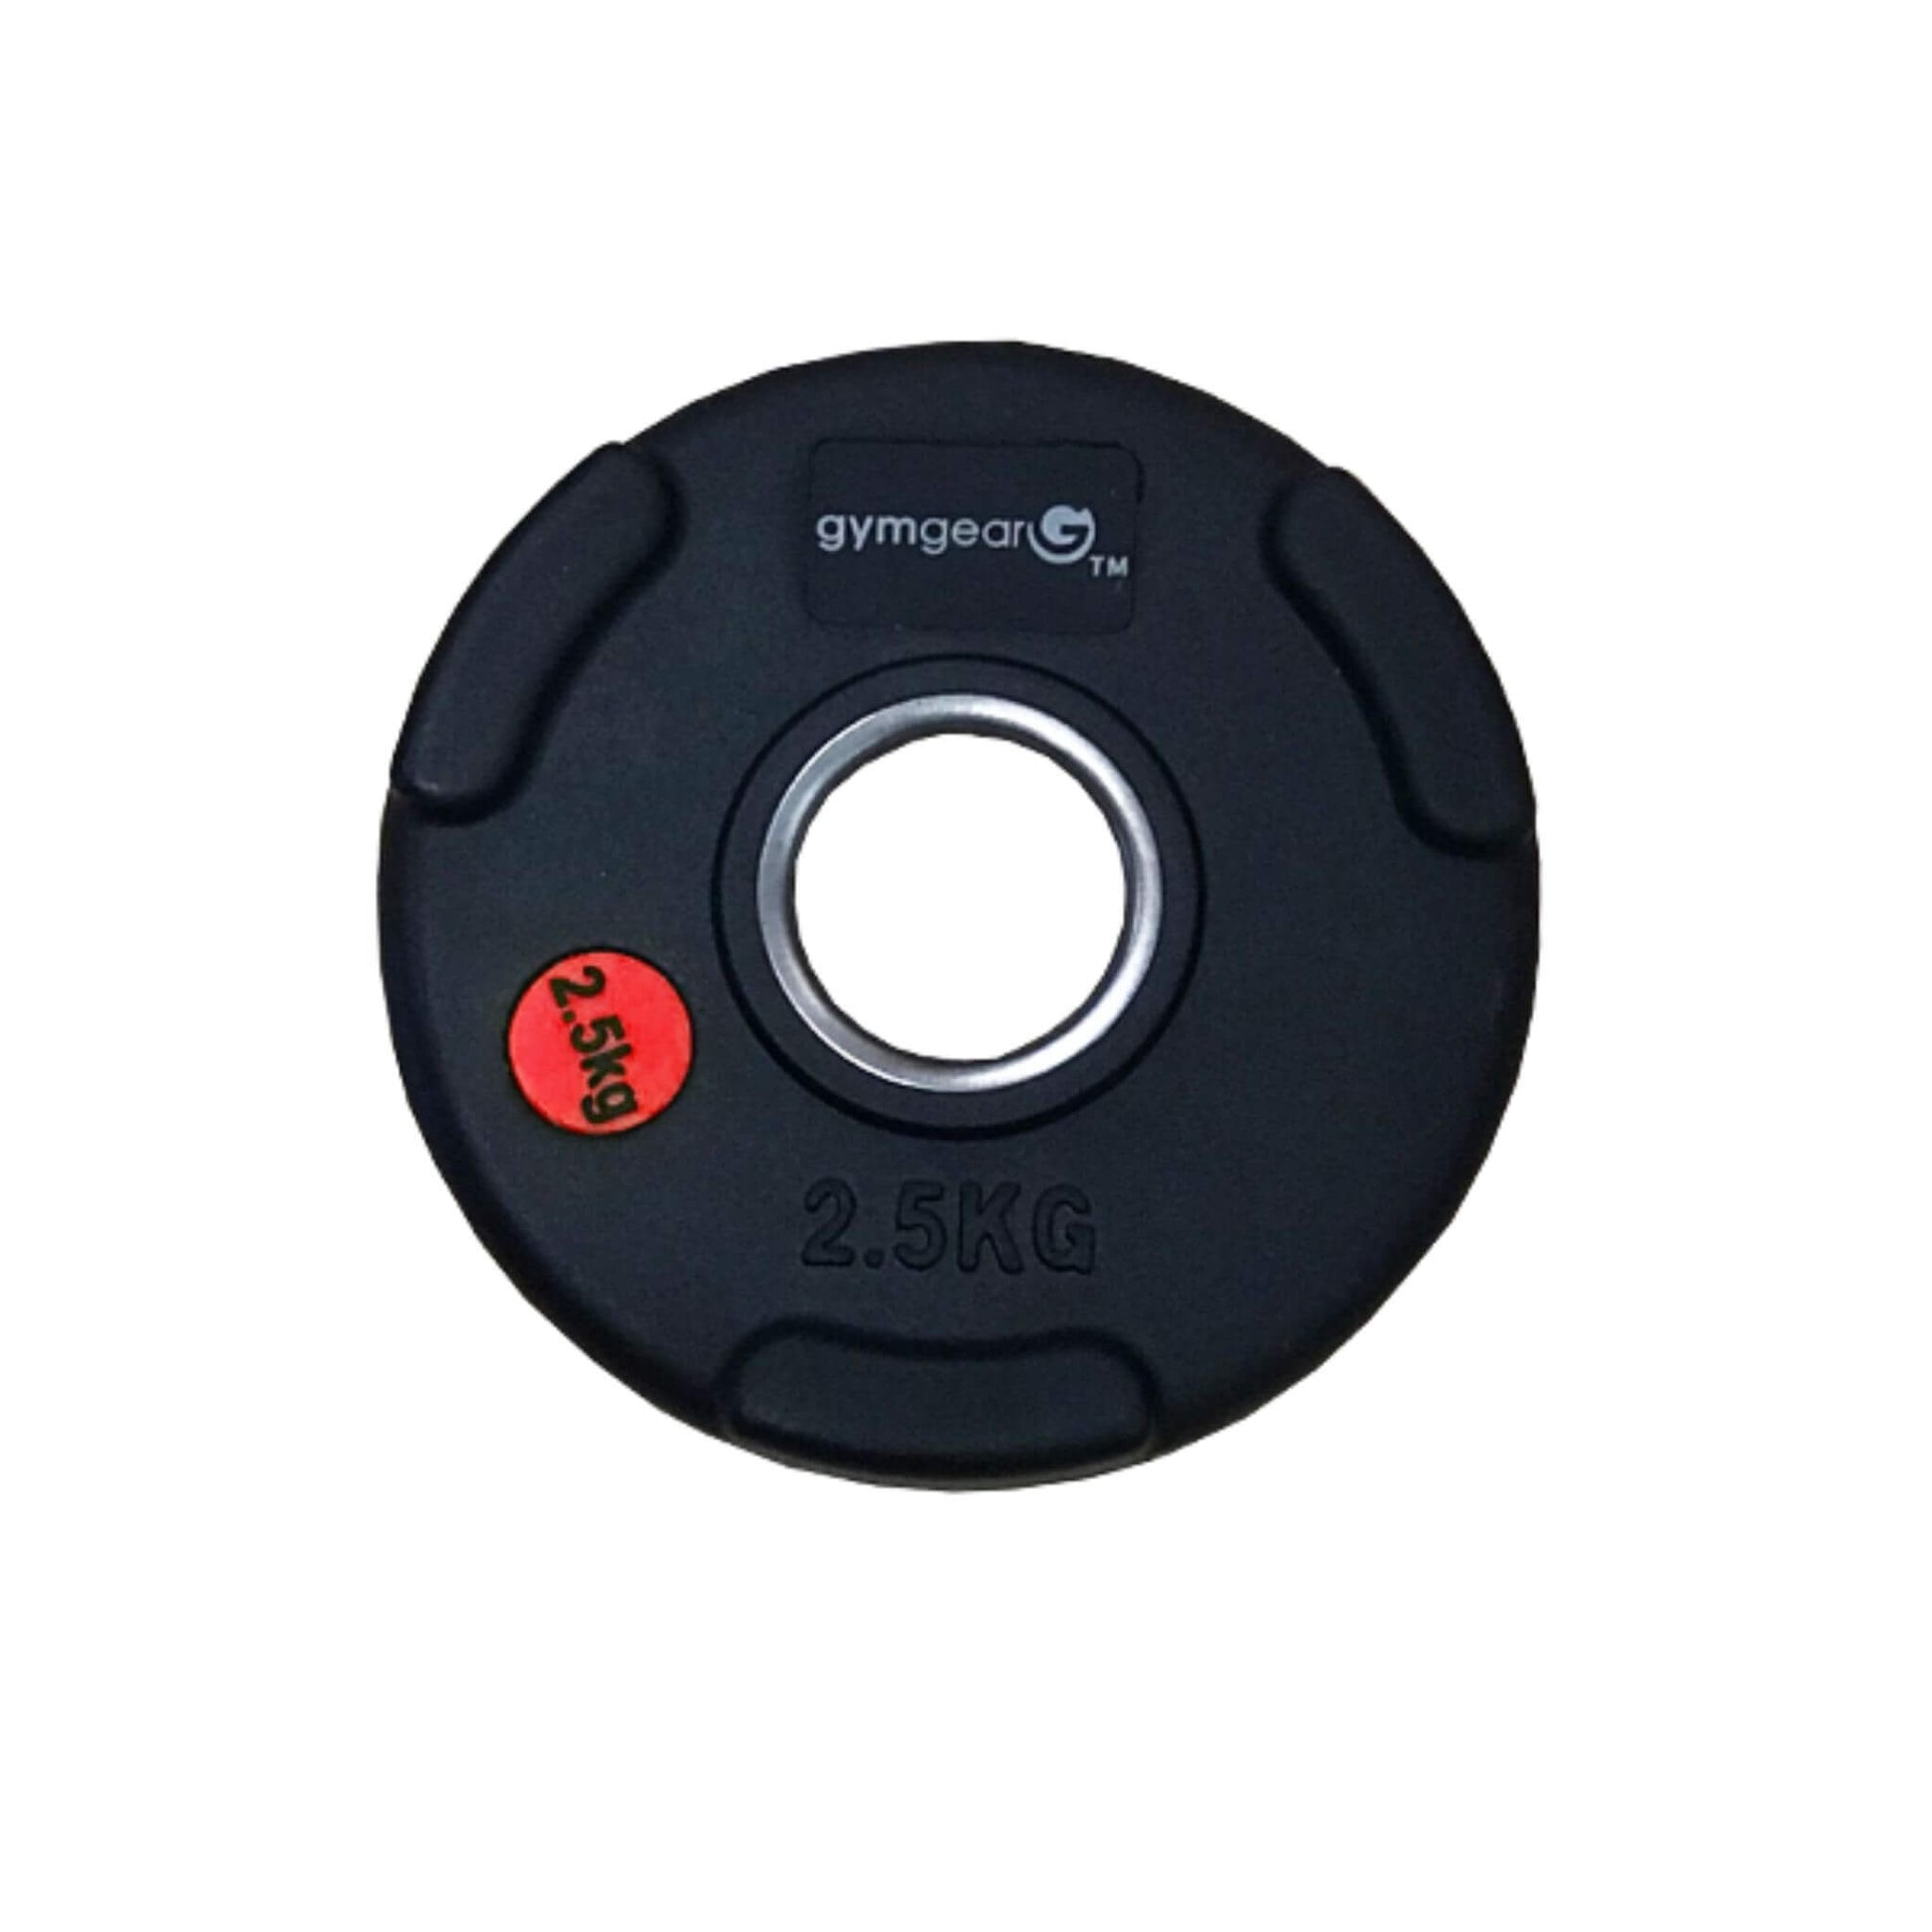 Rubber Olympic Weight Plates (Tri-Grip) 200kg set